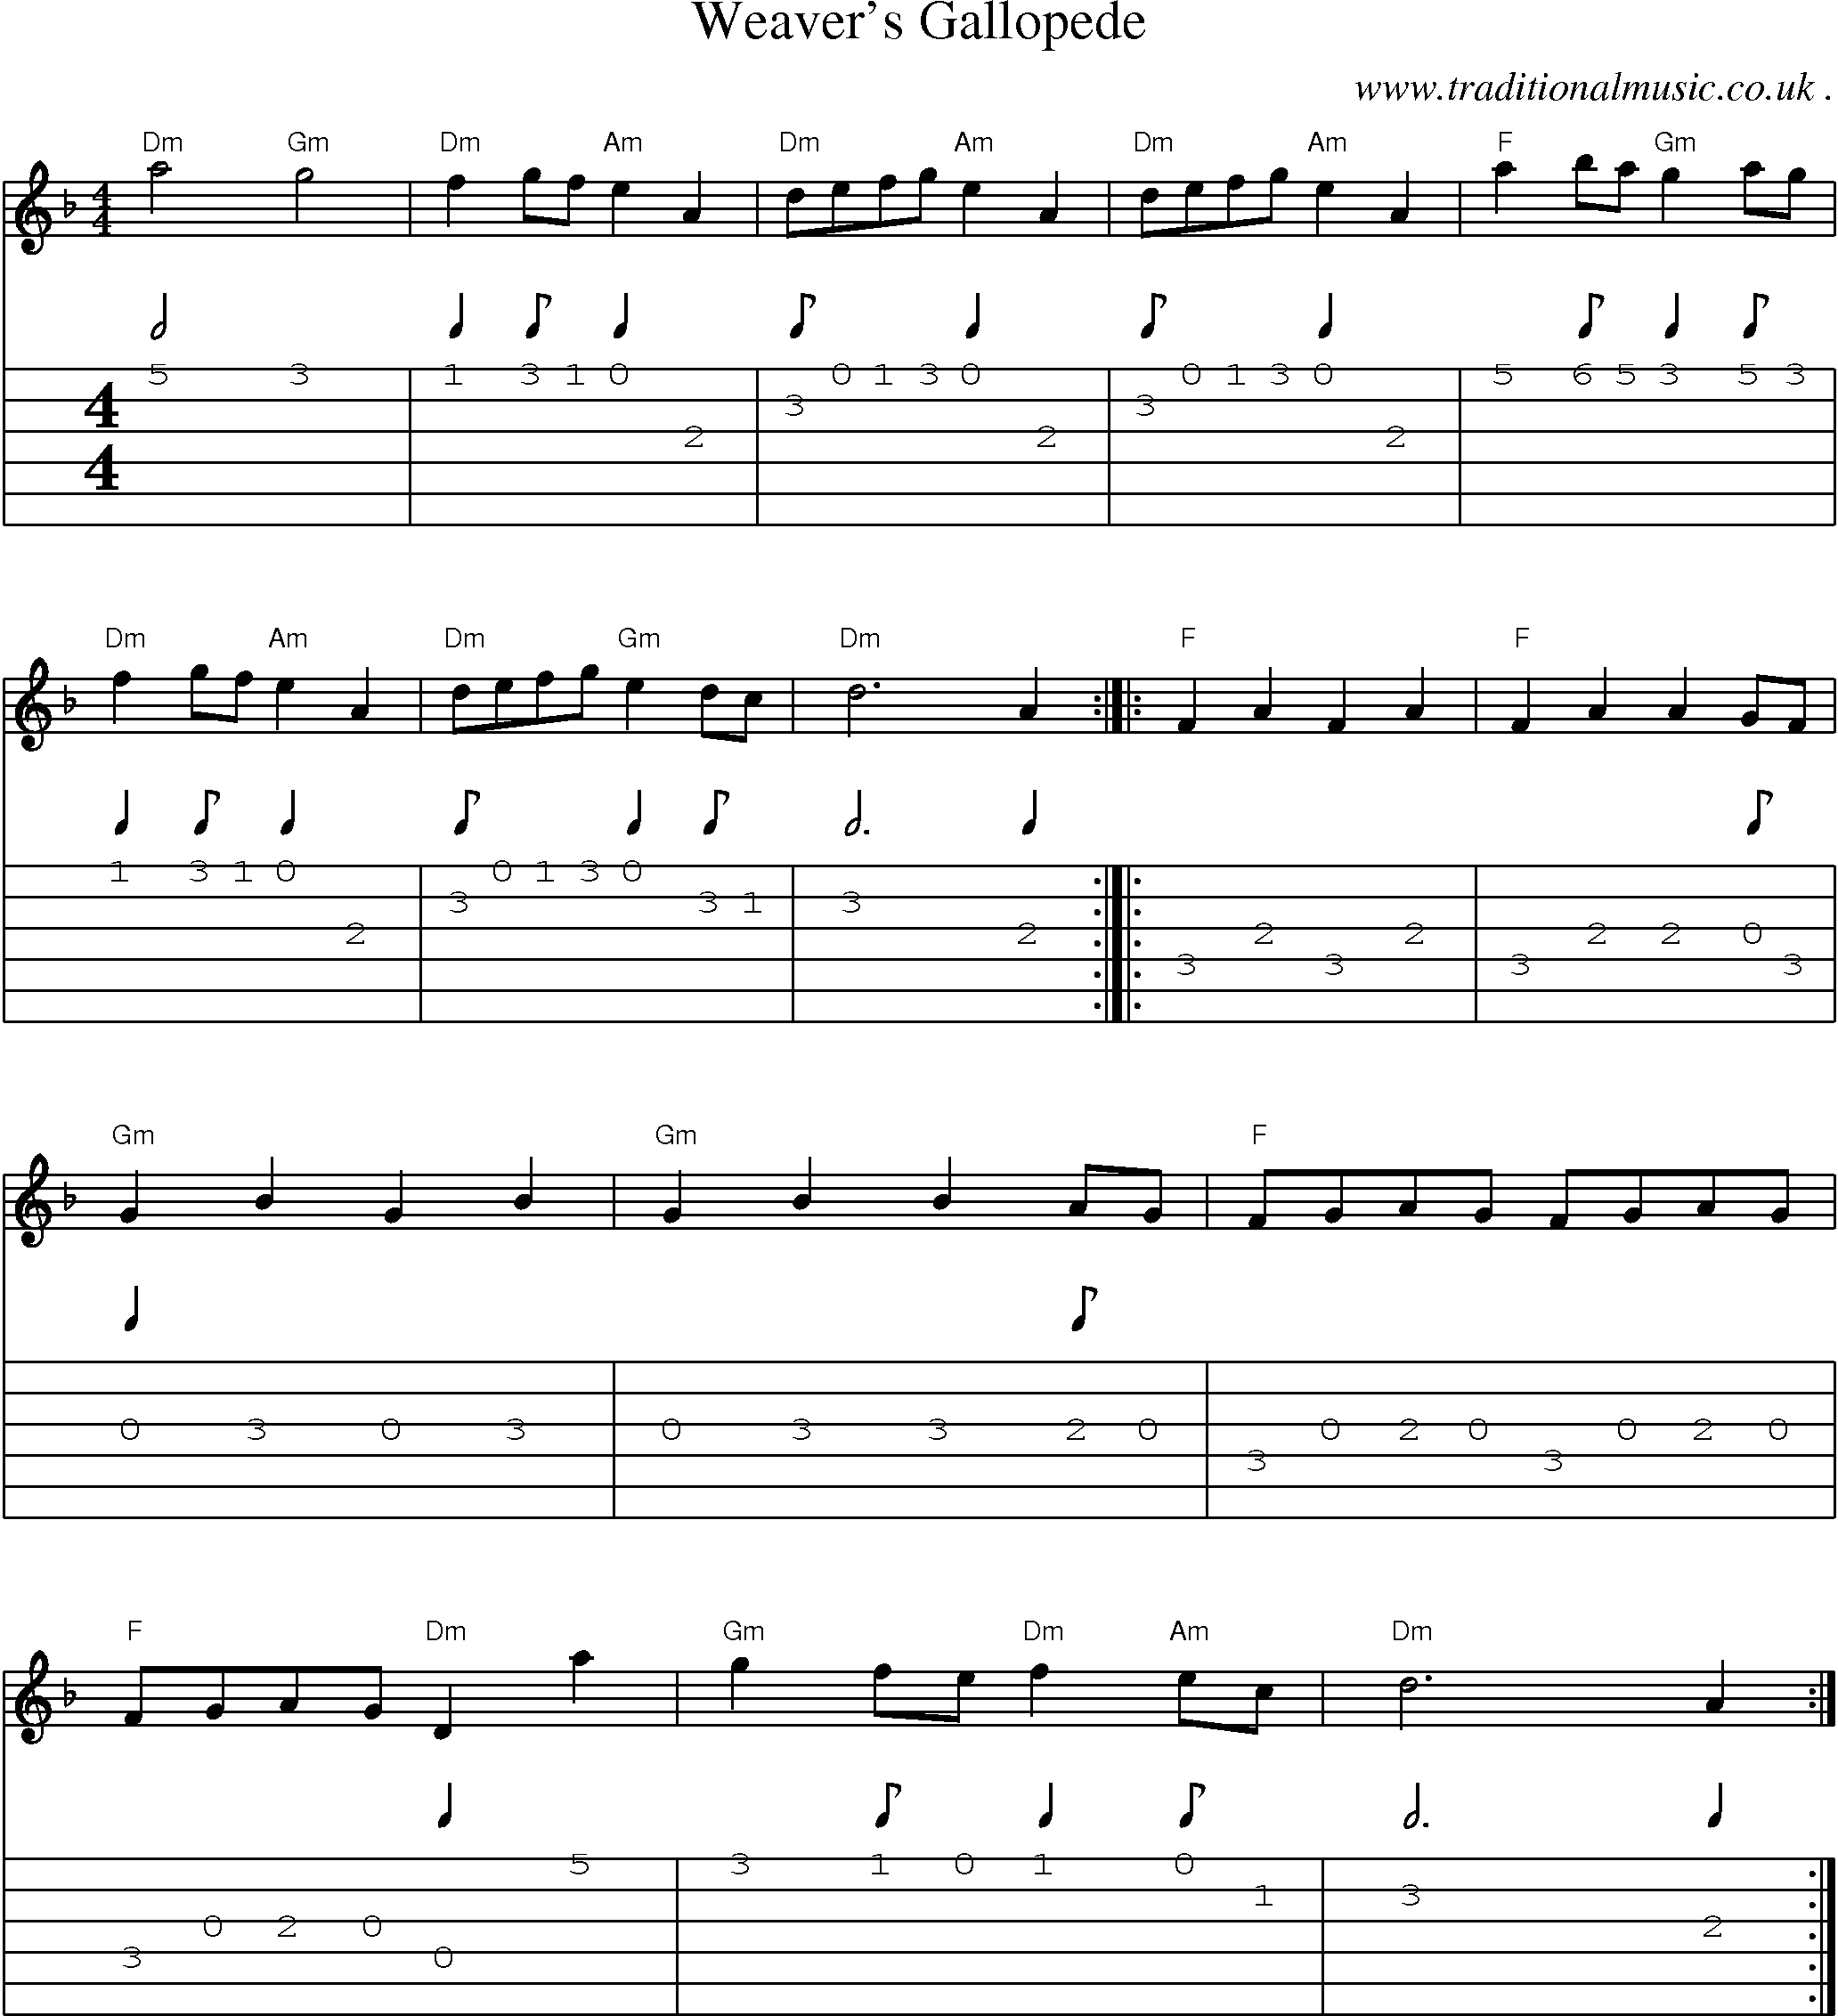 Sheet-Music and Guitar Tabs for Weavers Gallopede